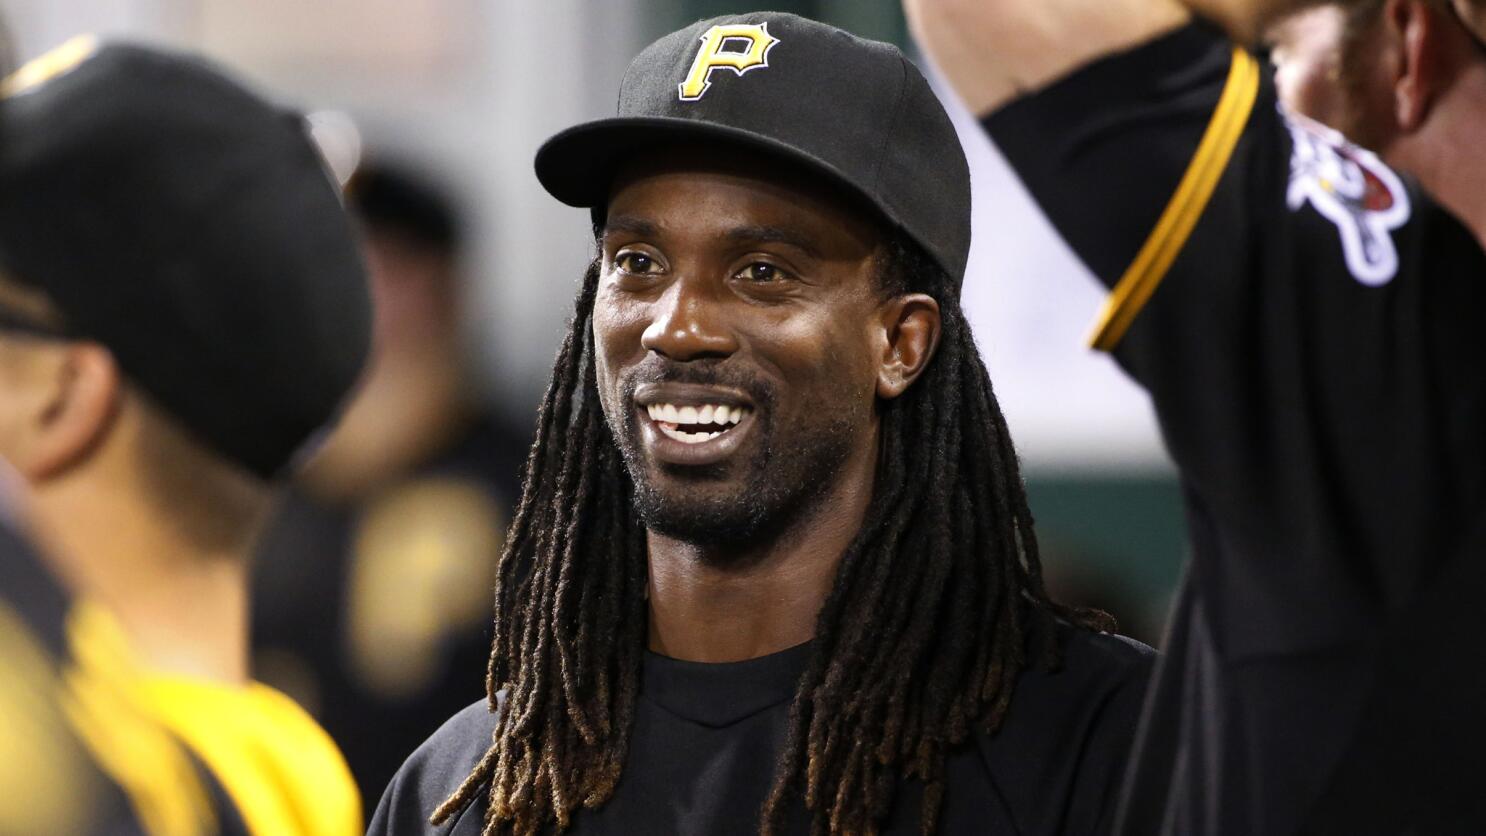 I went to work': Andrew McCutchen's swing looking as good as ever